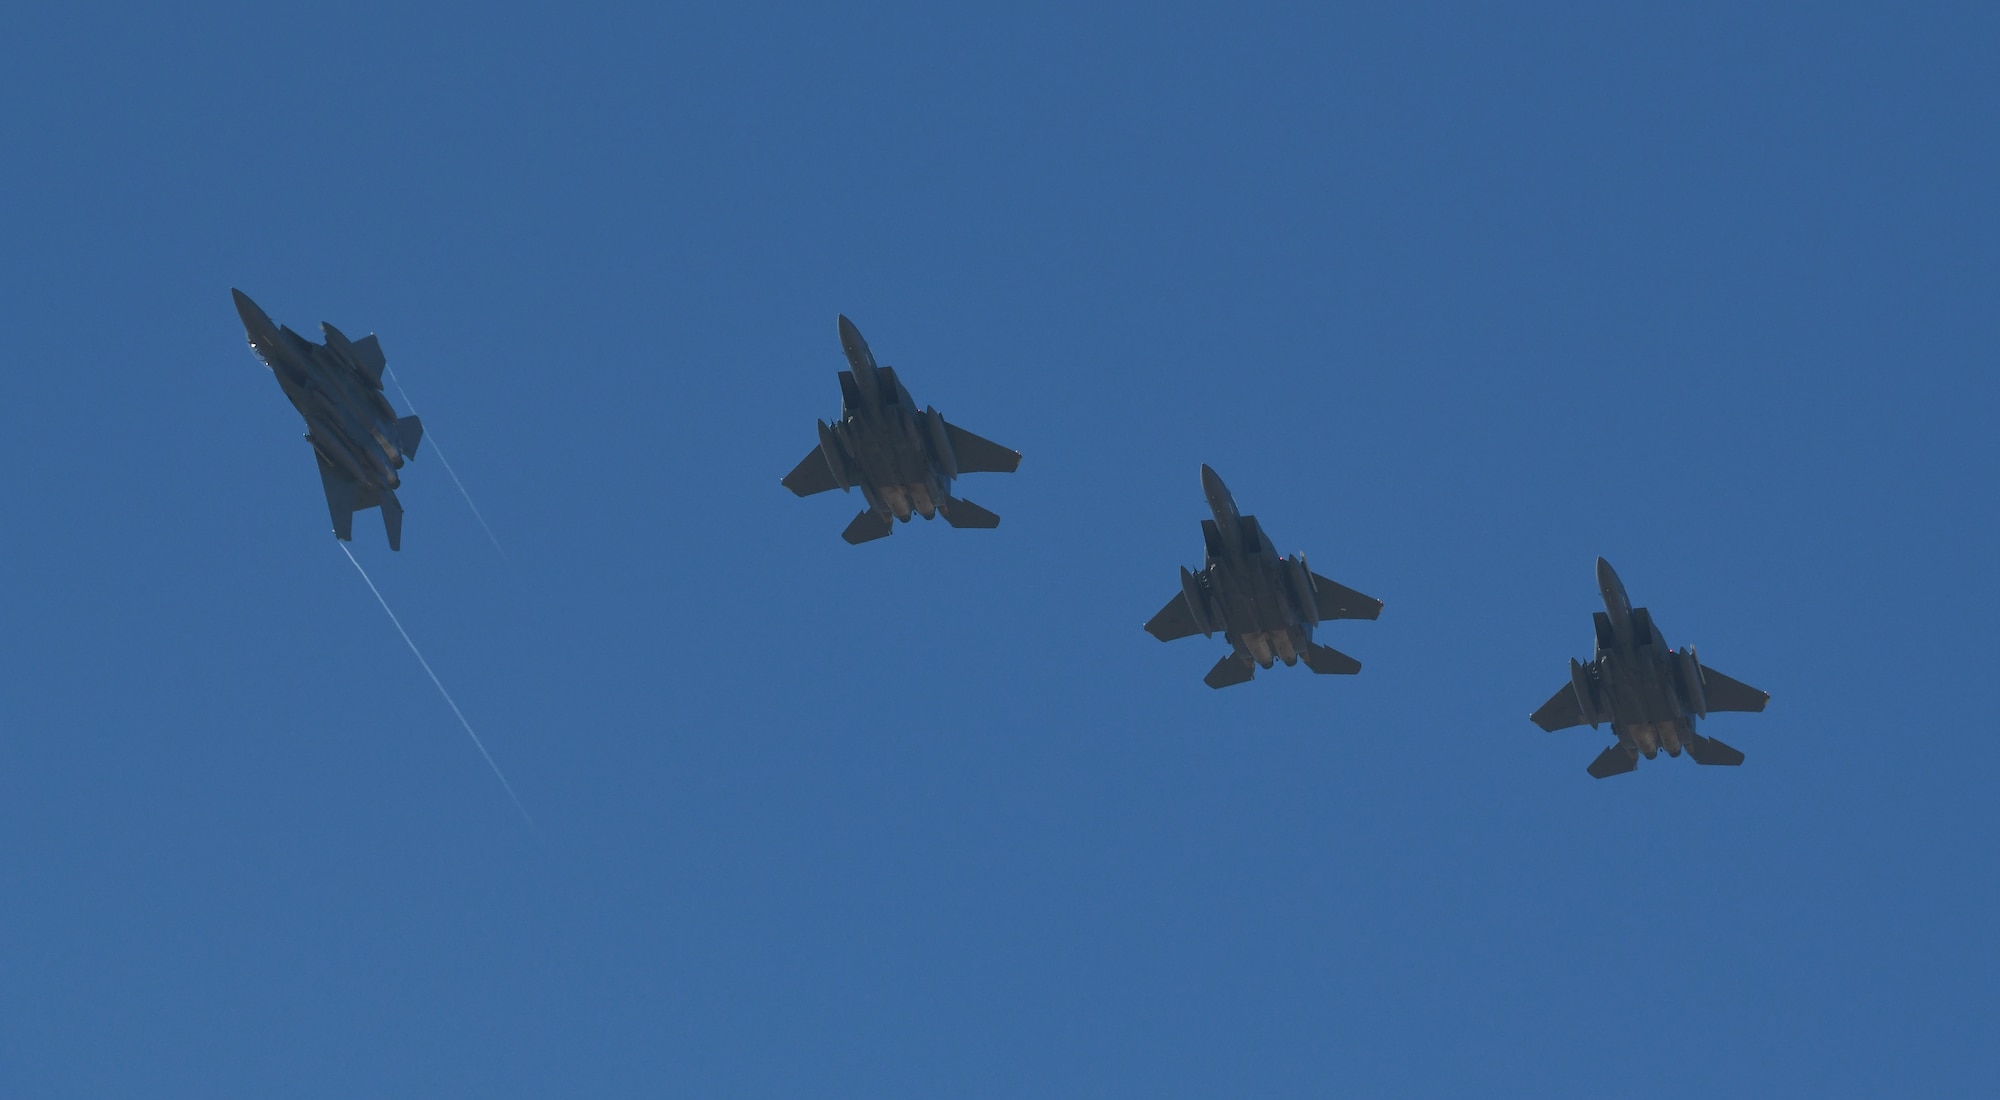 Four U.S. Air Force F-15E Strike Eagles from Royal Air Force Lakenheath, England, fly above Albacete Air Base, Spain, during the NATO Tactical Leadership Programme 19-1 flying course, Feb. 15, 2019. The multilateral training course is designed to focus on developing tactical air expertise and leadership skills. (U.S. Air Force photo by Staff Sgt. Alex Fox Echols III)